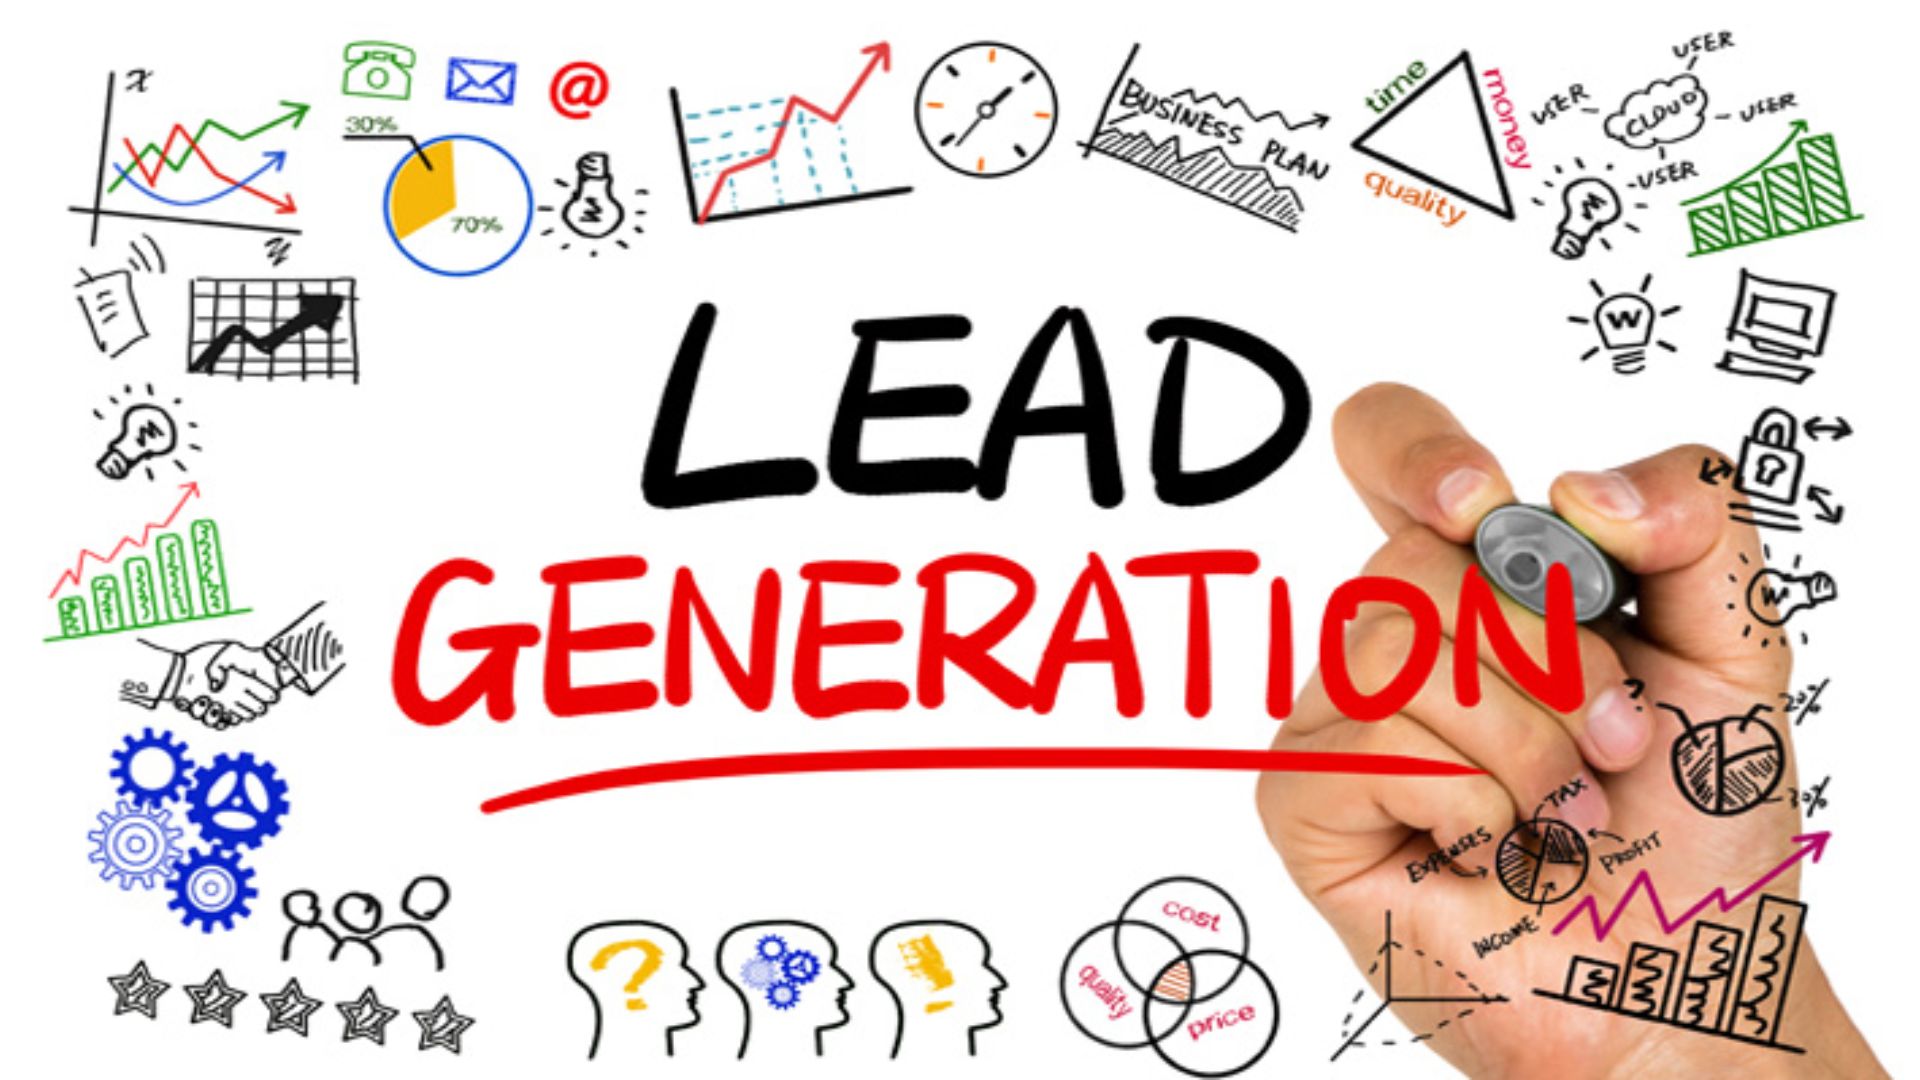 How To Generate More Leads And Revenue?